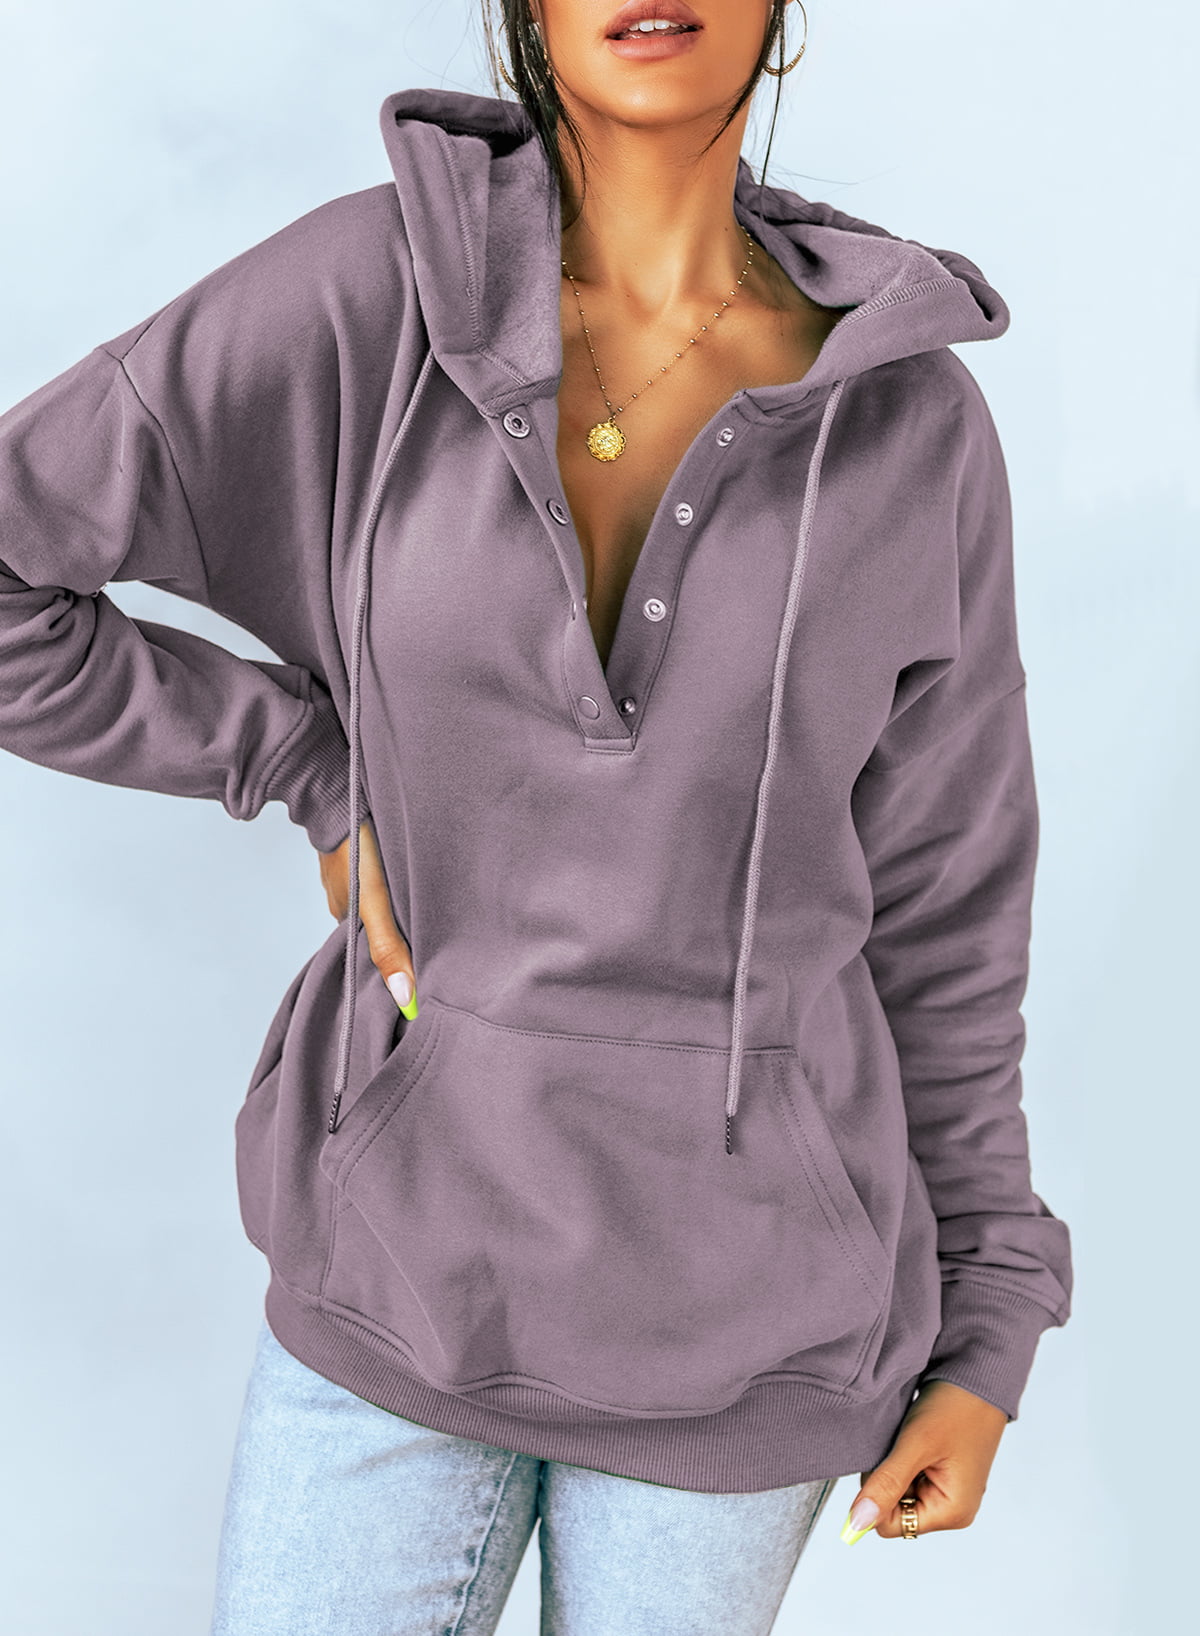 Blibea Women's Hoodie Sweatshirt Long Sleeve 1/4 Button Closure Drawstring Pullover Hooded Tops - image 7 of 8